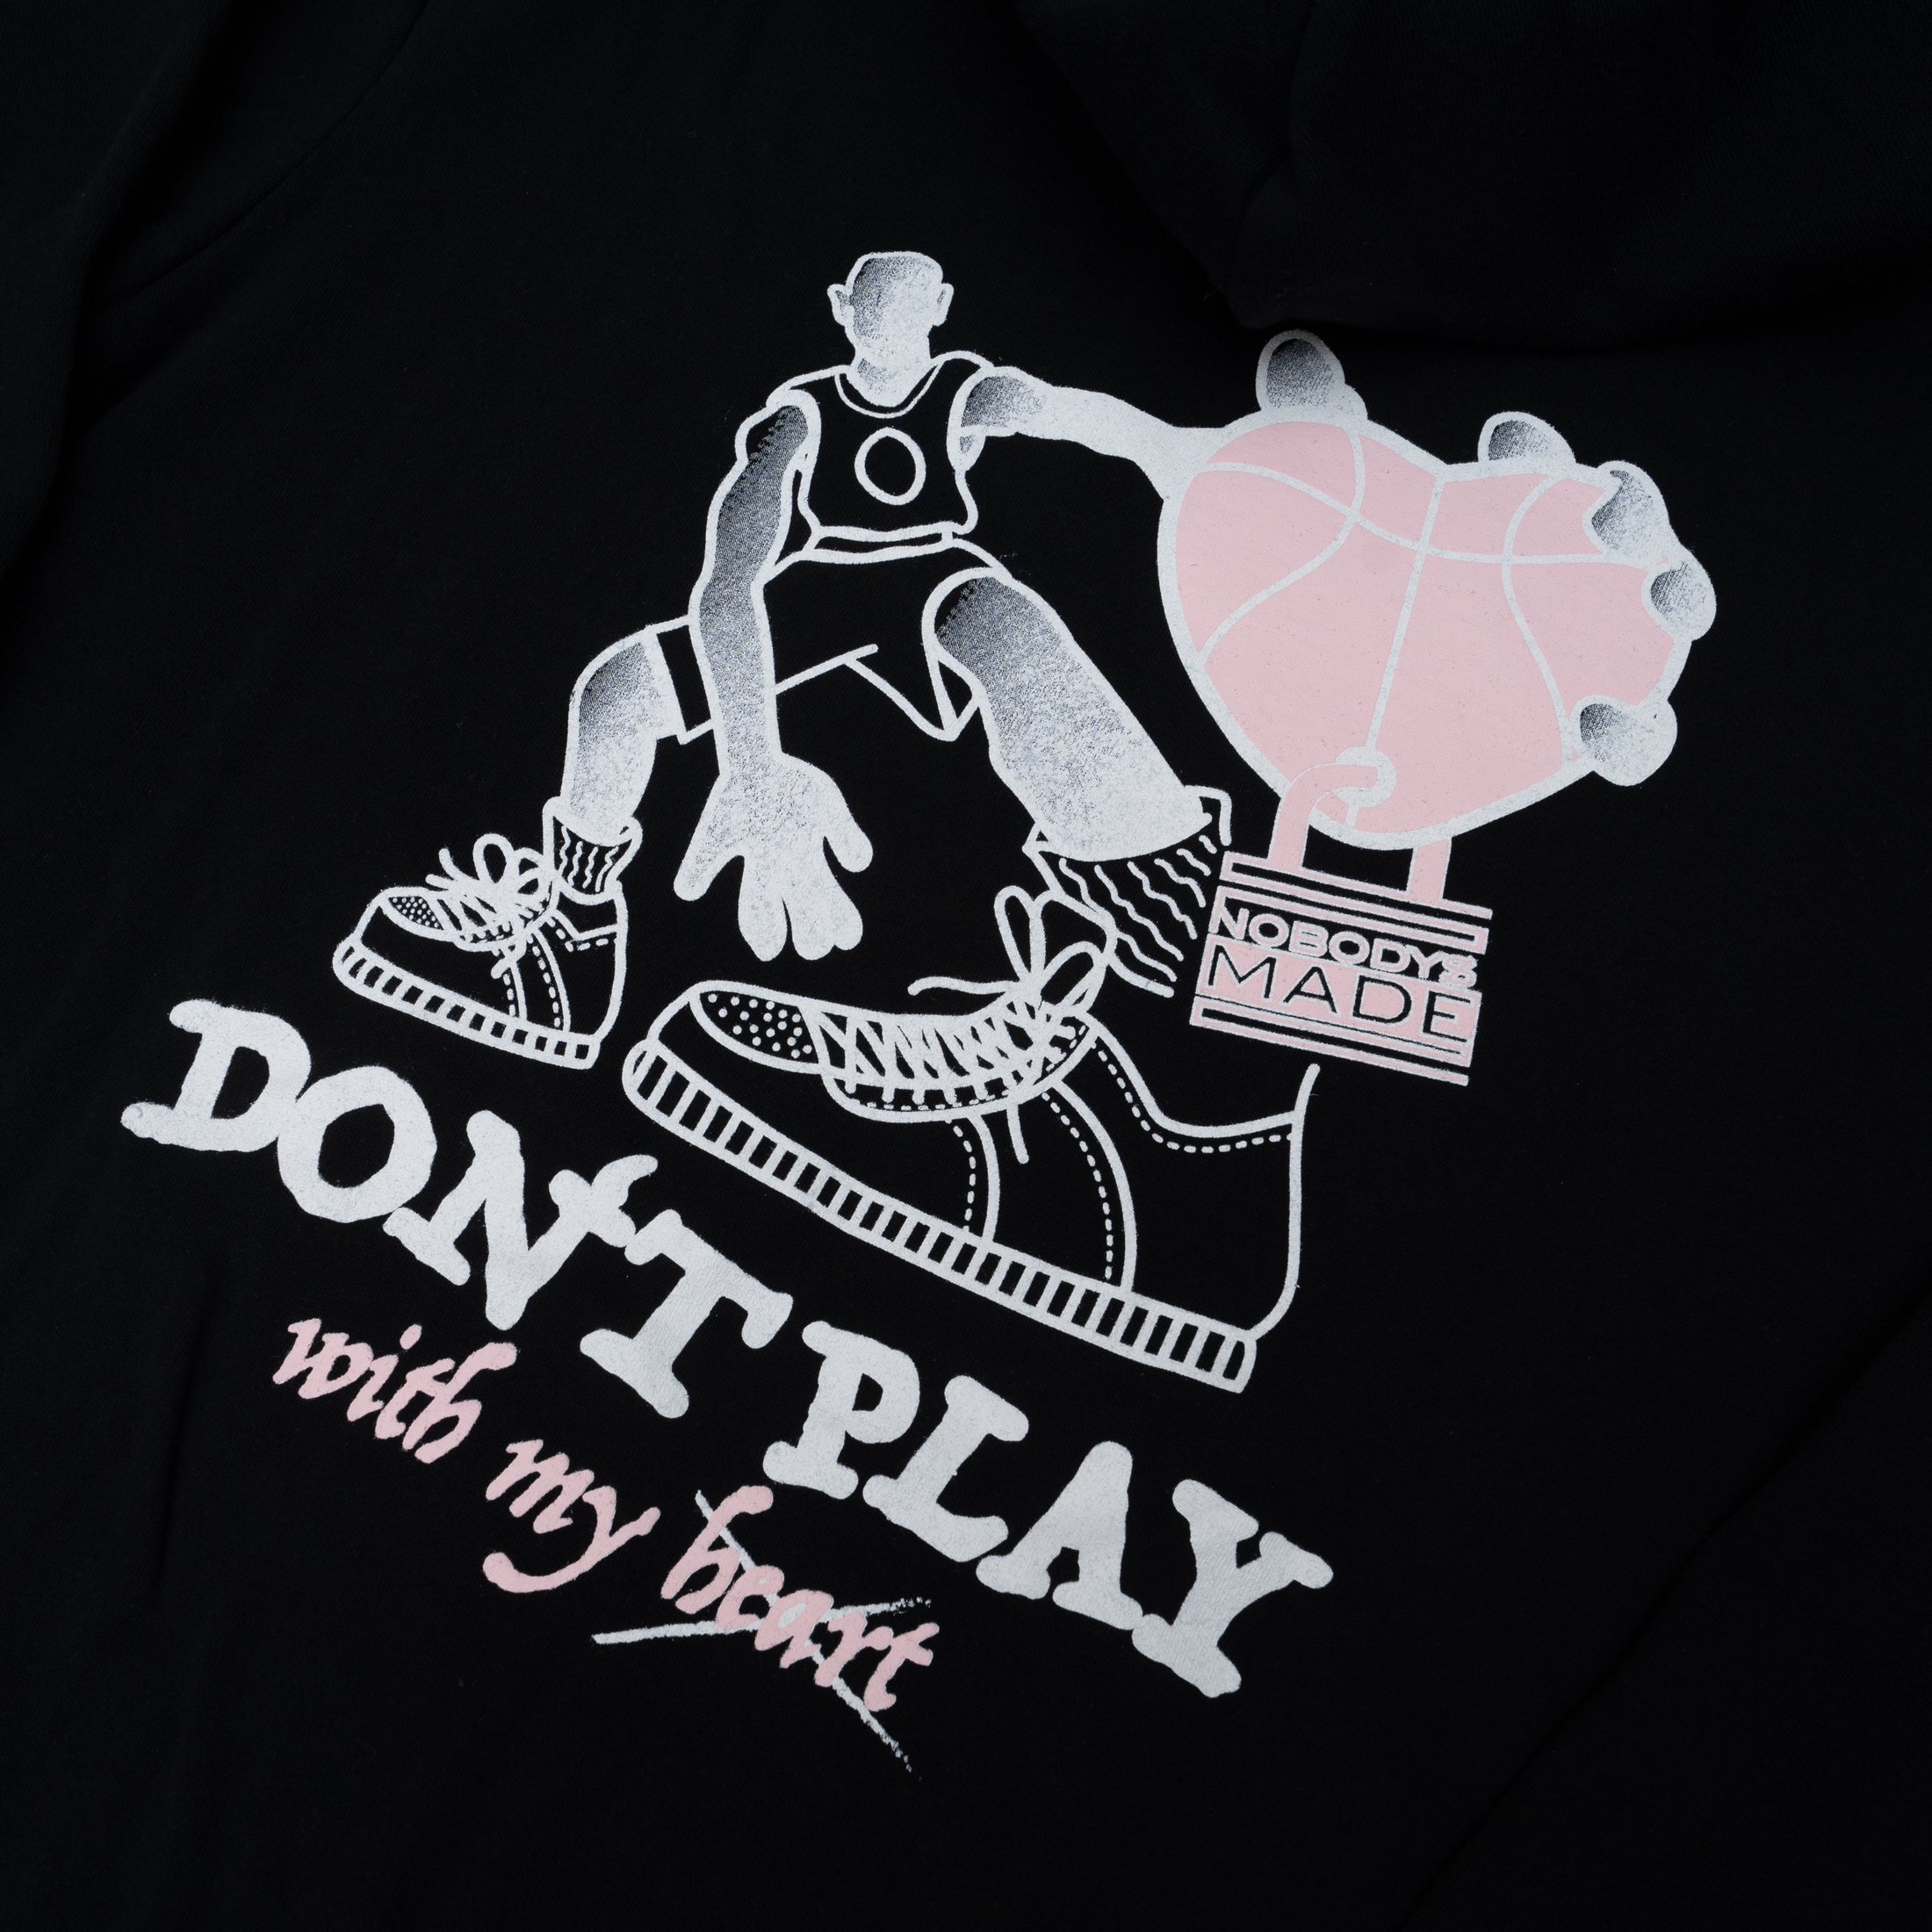 NOBODYS MADE DON’T PLAY WITH MY HEART Hoodie